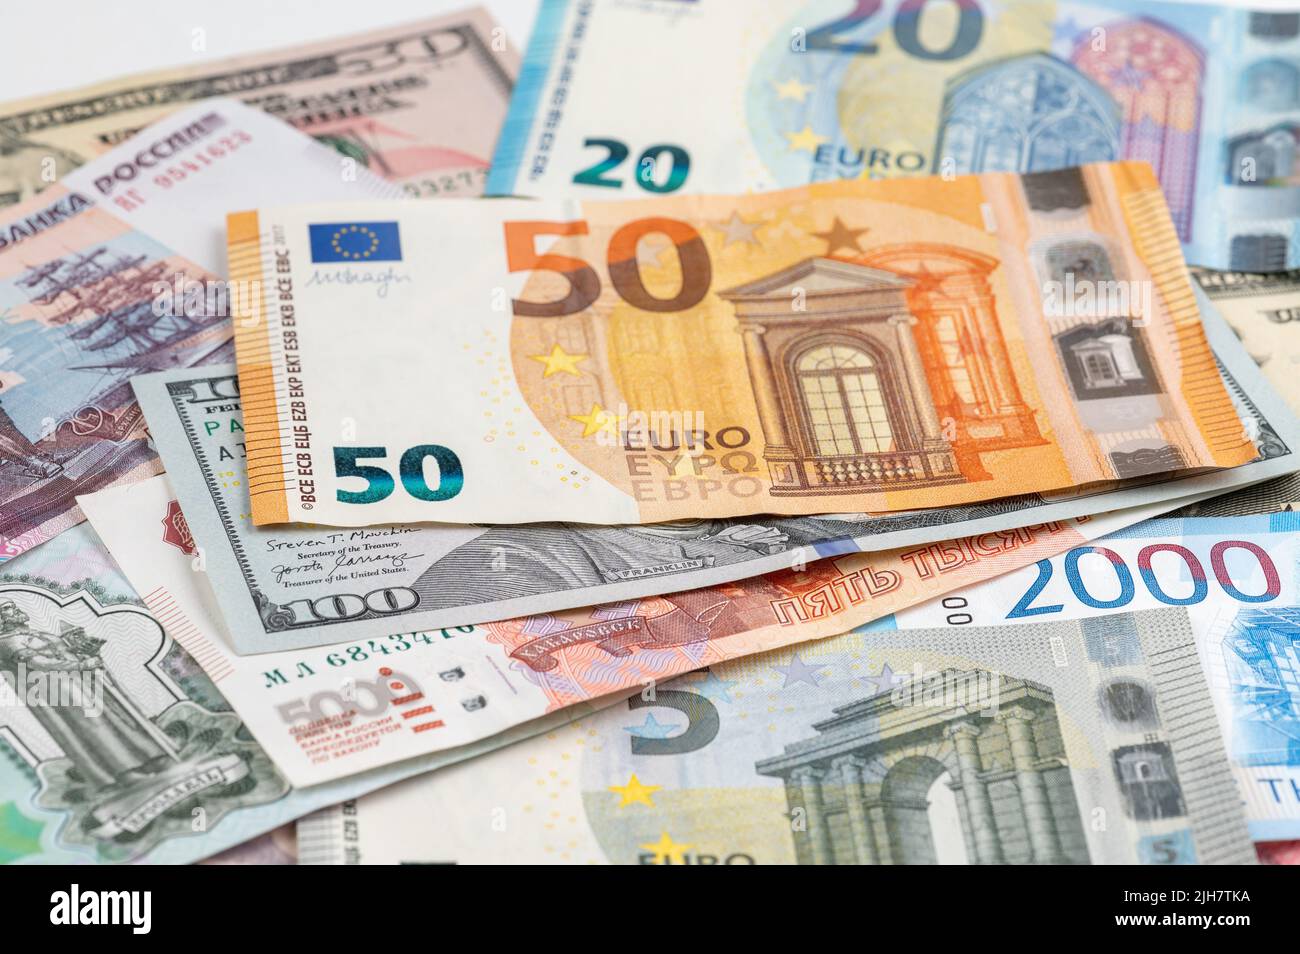 Money from different countries: dollars, euros, rubles. International currencies background. Stock Photo